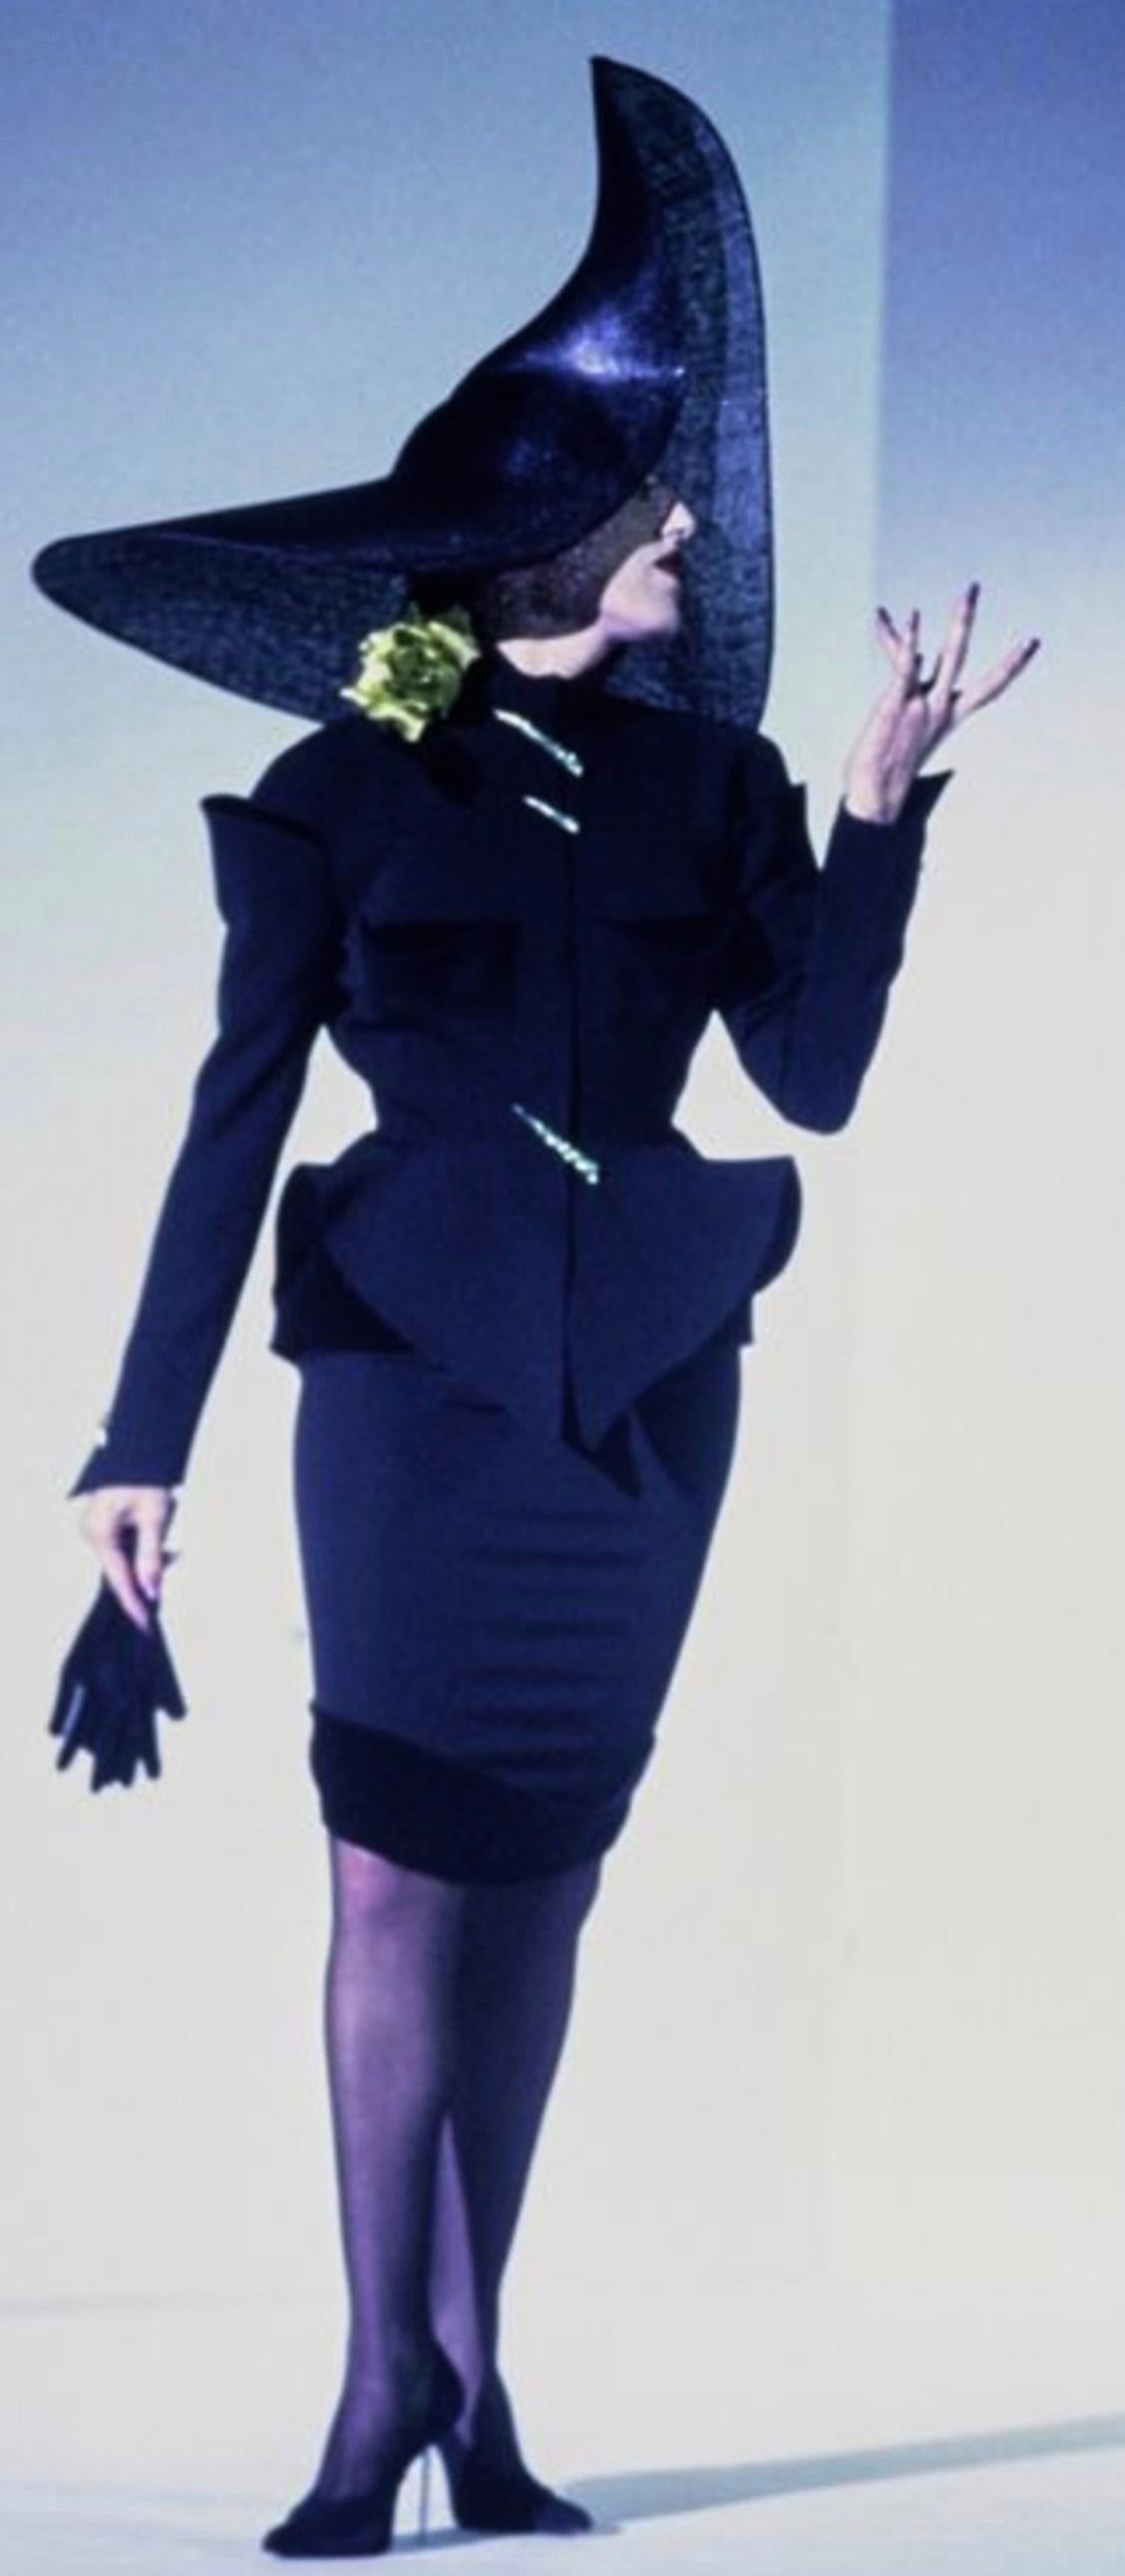 
Stunning  Thierry Mugler Ensemble, Fall Winter 1995 Collection. Masterful construction, a fabulous Thierry Mugler creation. Navy /dark blue skirtsuit,  jacket and skirt. Silver metal details on the front jacket.
Extraordinairy shape! Feminine